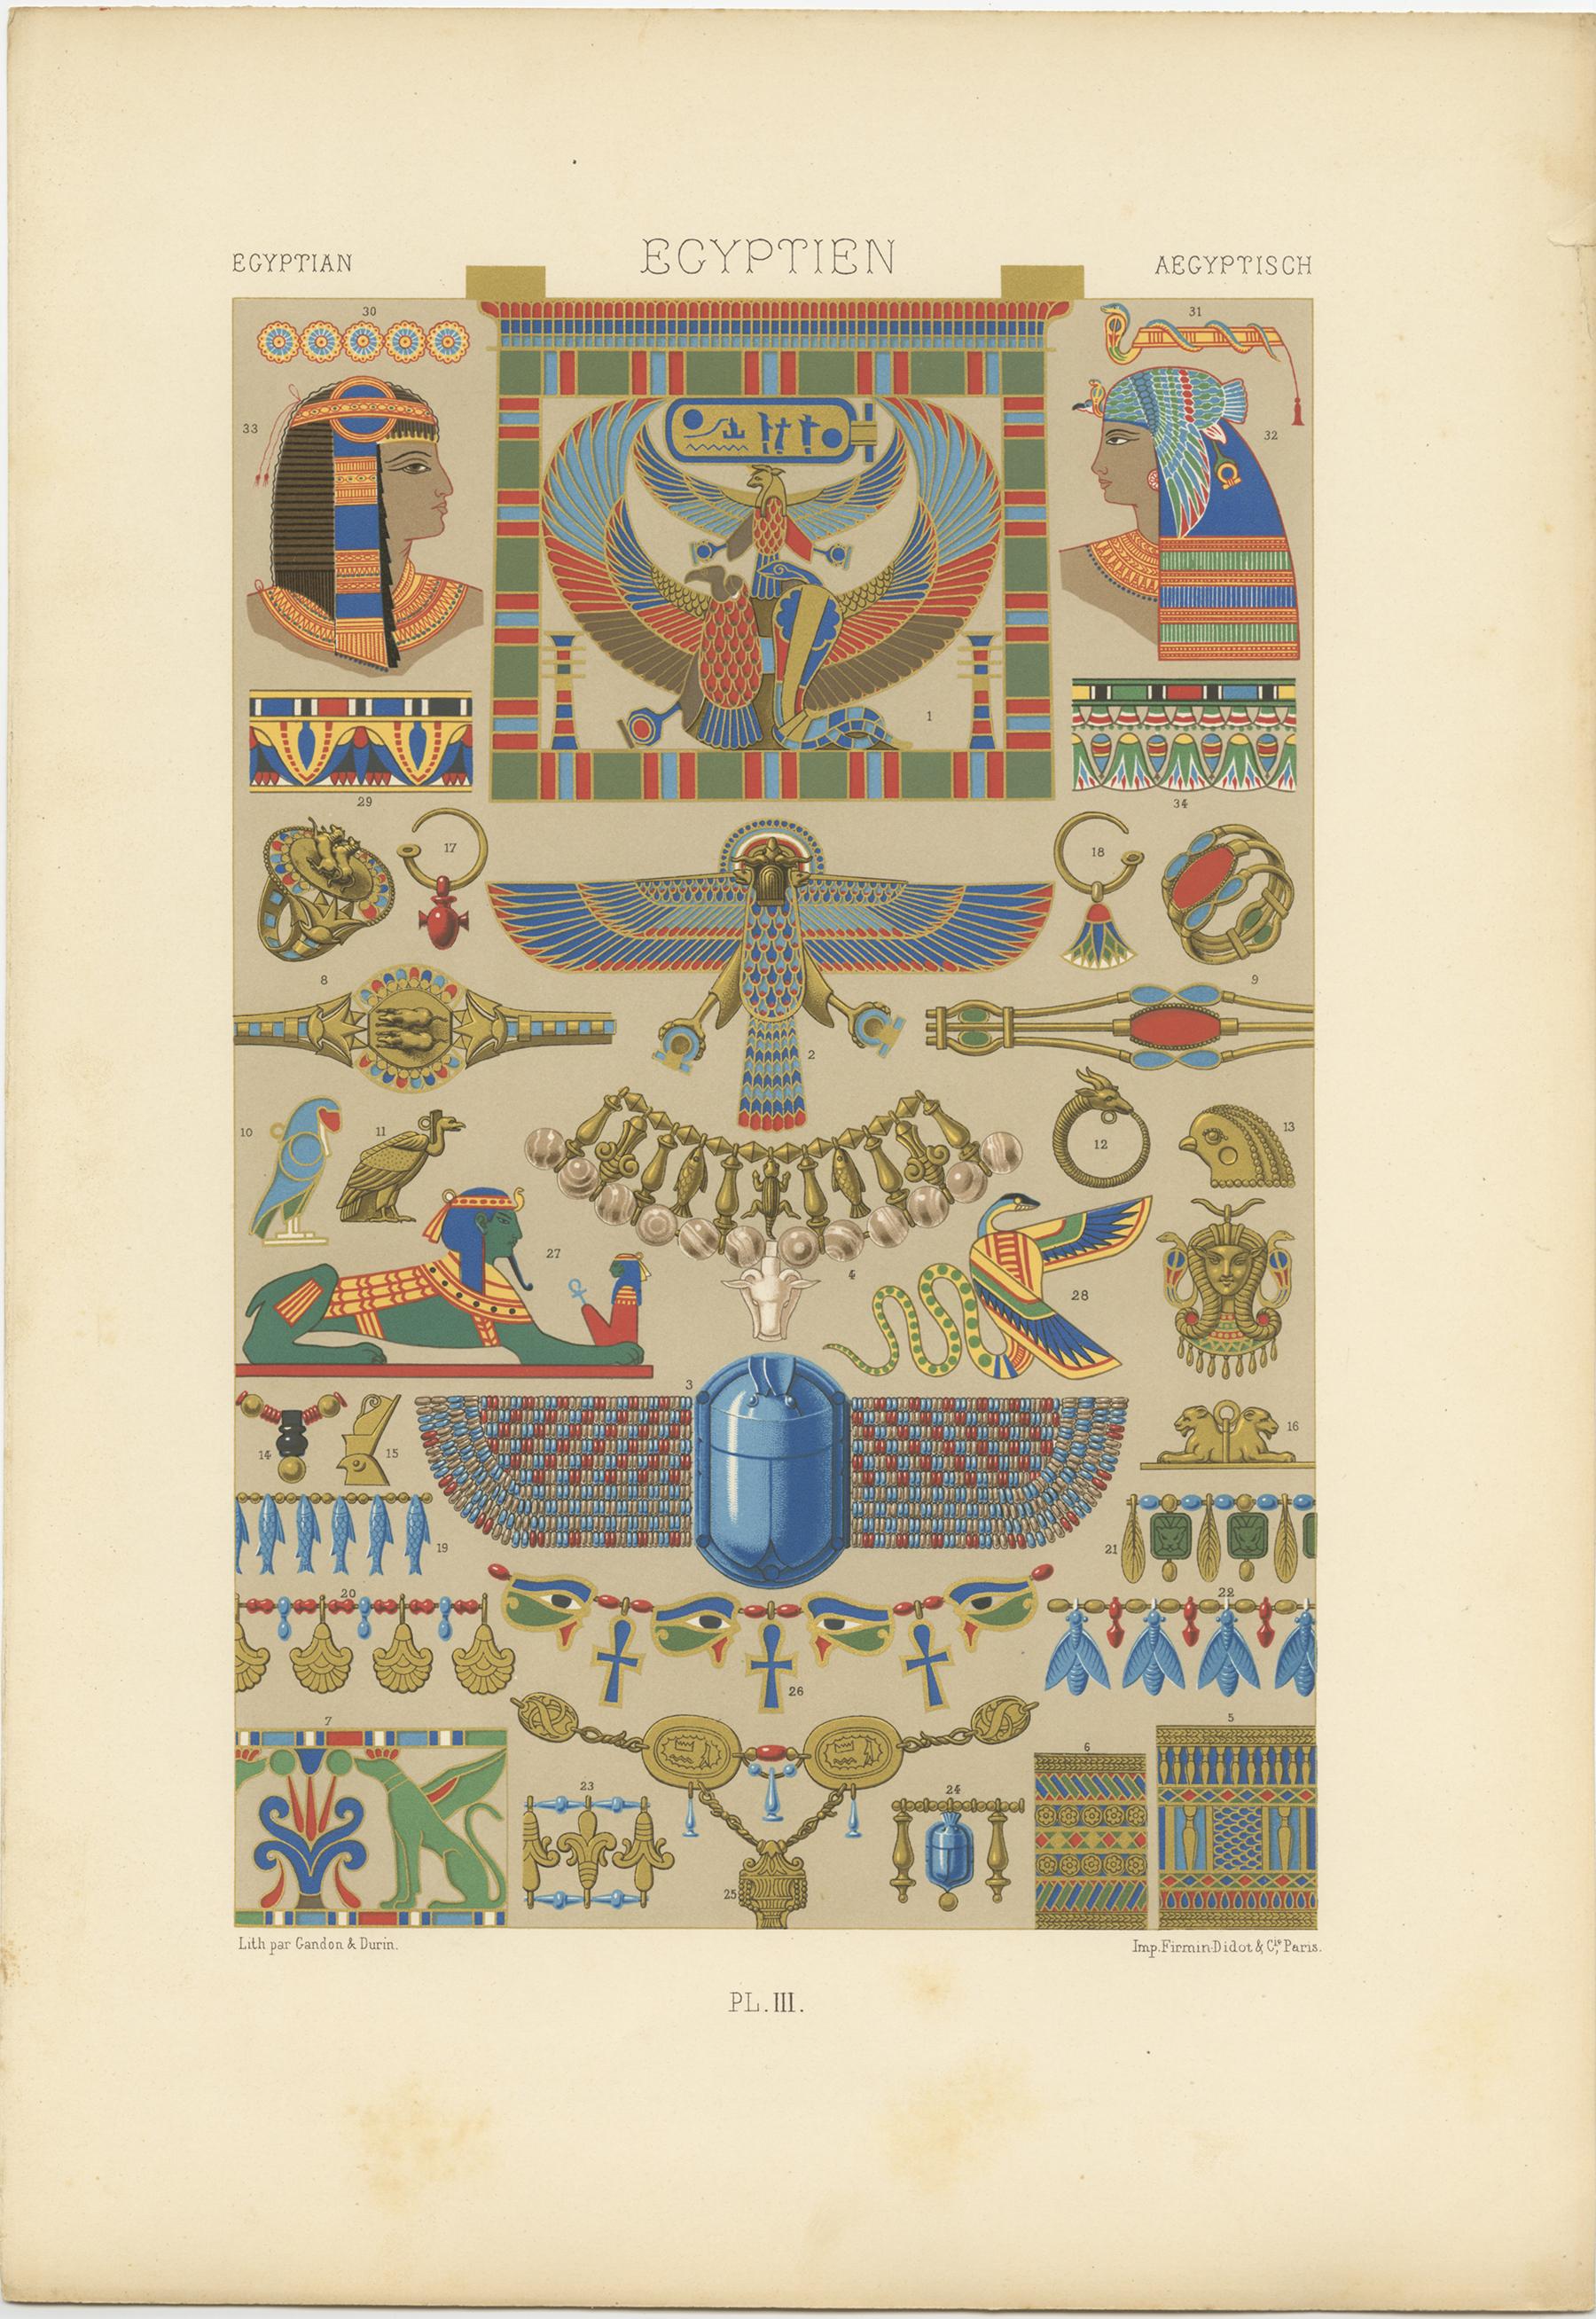 Antique print titled 'Egyptian - Egyptien - Aegyptisch'. Chromolithograph of Egyptian ornaments and decorative arts. This print originates from 'l'Ornement Polychrome' by Auguste Racinet. Published, circa 1890.